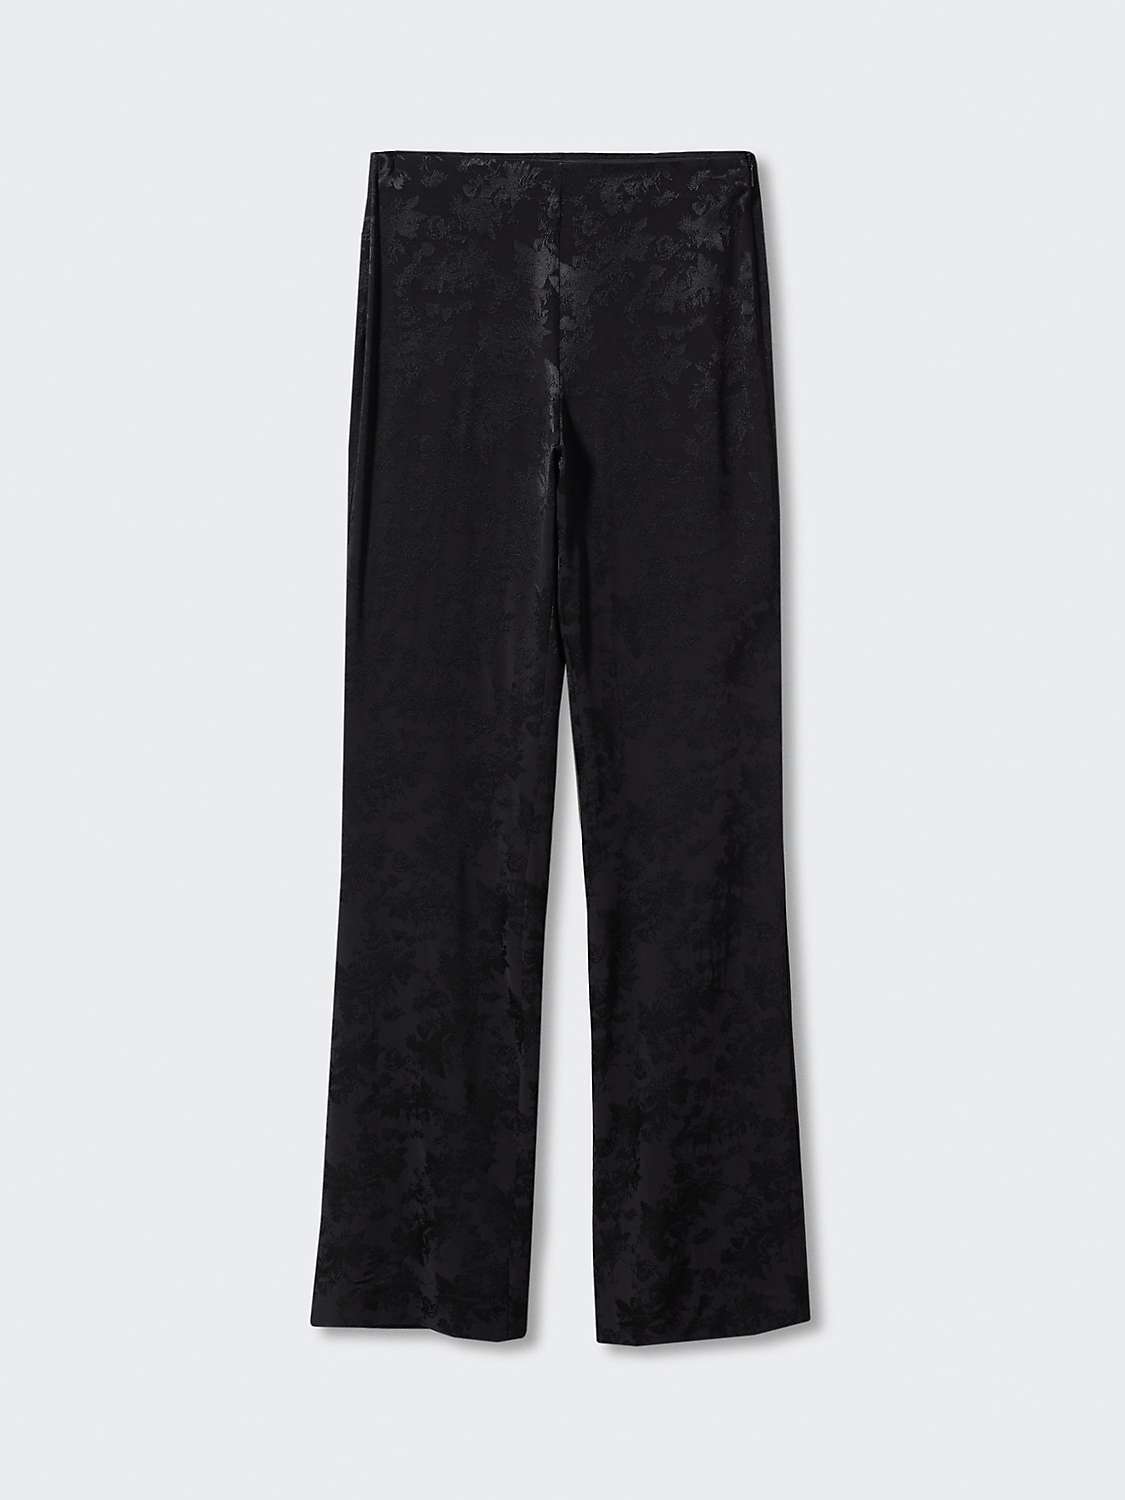 Buy Mango Jacky Flared Trousers Online at johnlewis.com